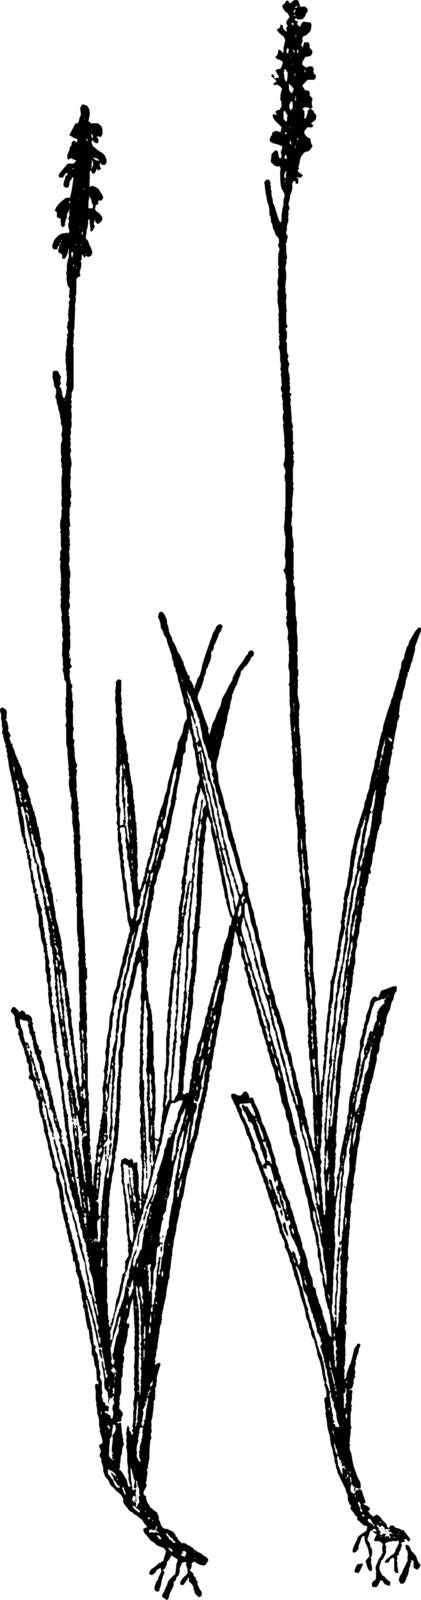 The Northern Single spike Sedge is a flower bud usually consists of a single erect spike up to 1 inch long at the top of the stem. It is of two type's male and female versions, vintage line drawing or engraving illustration.